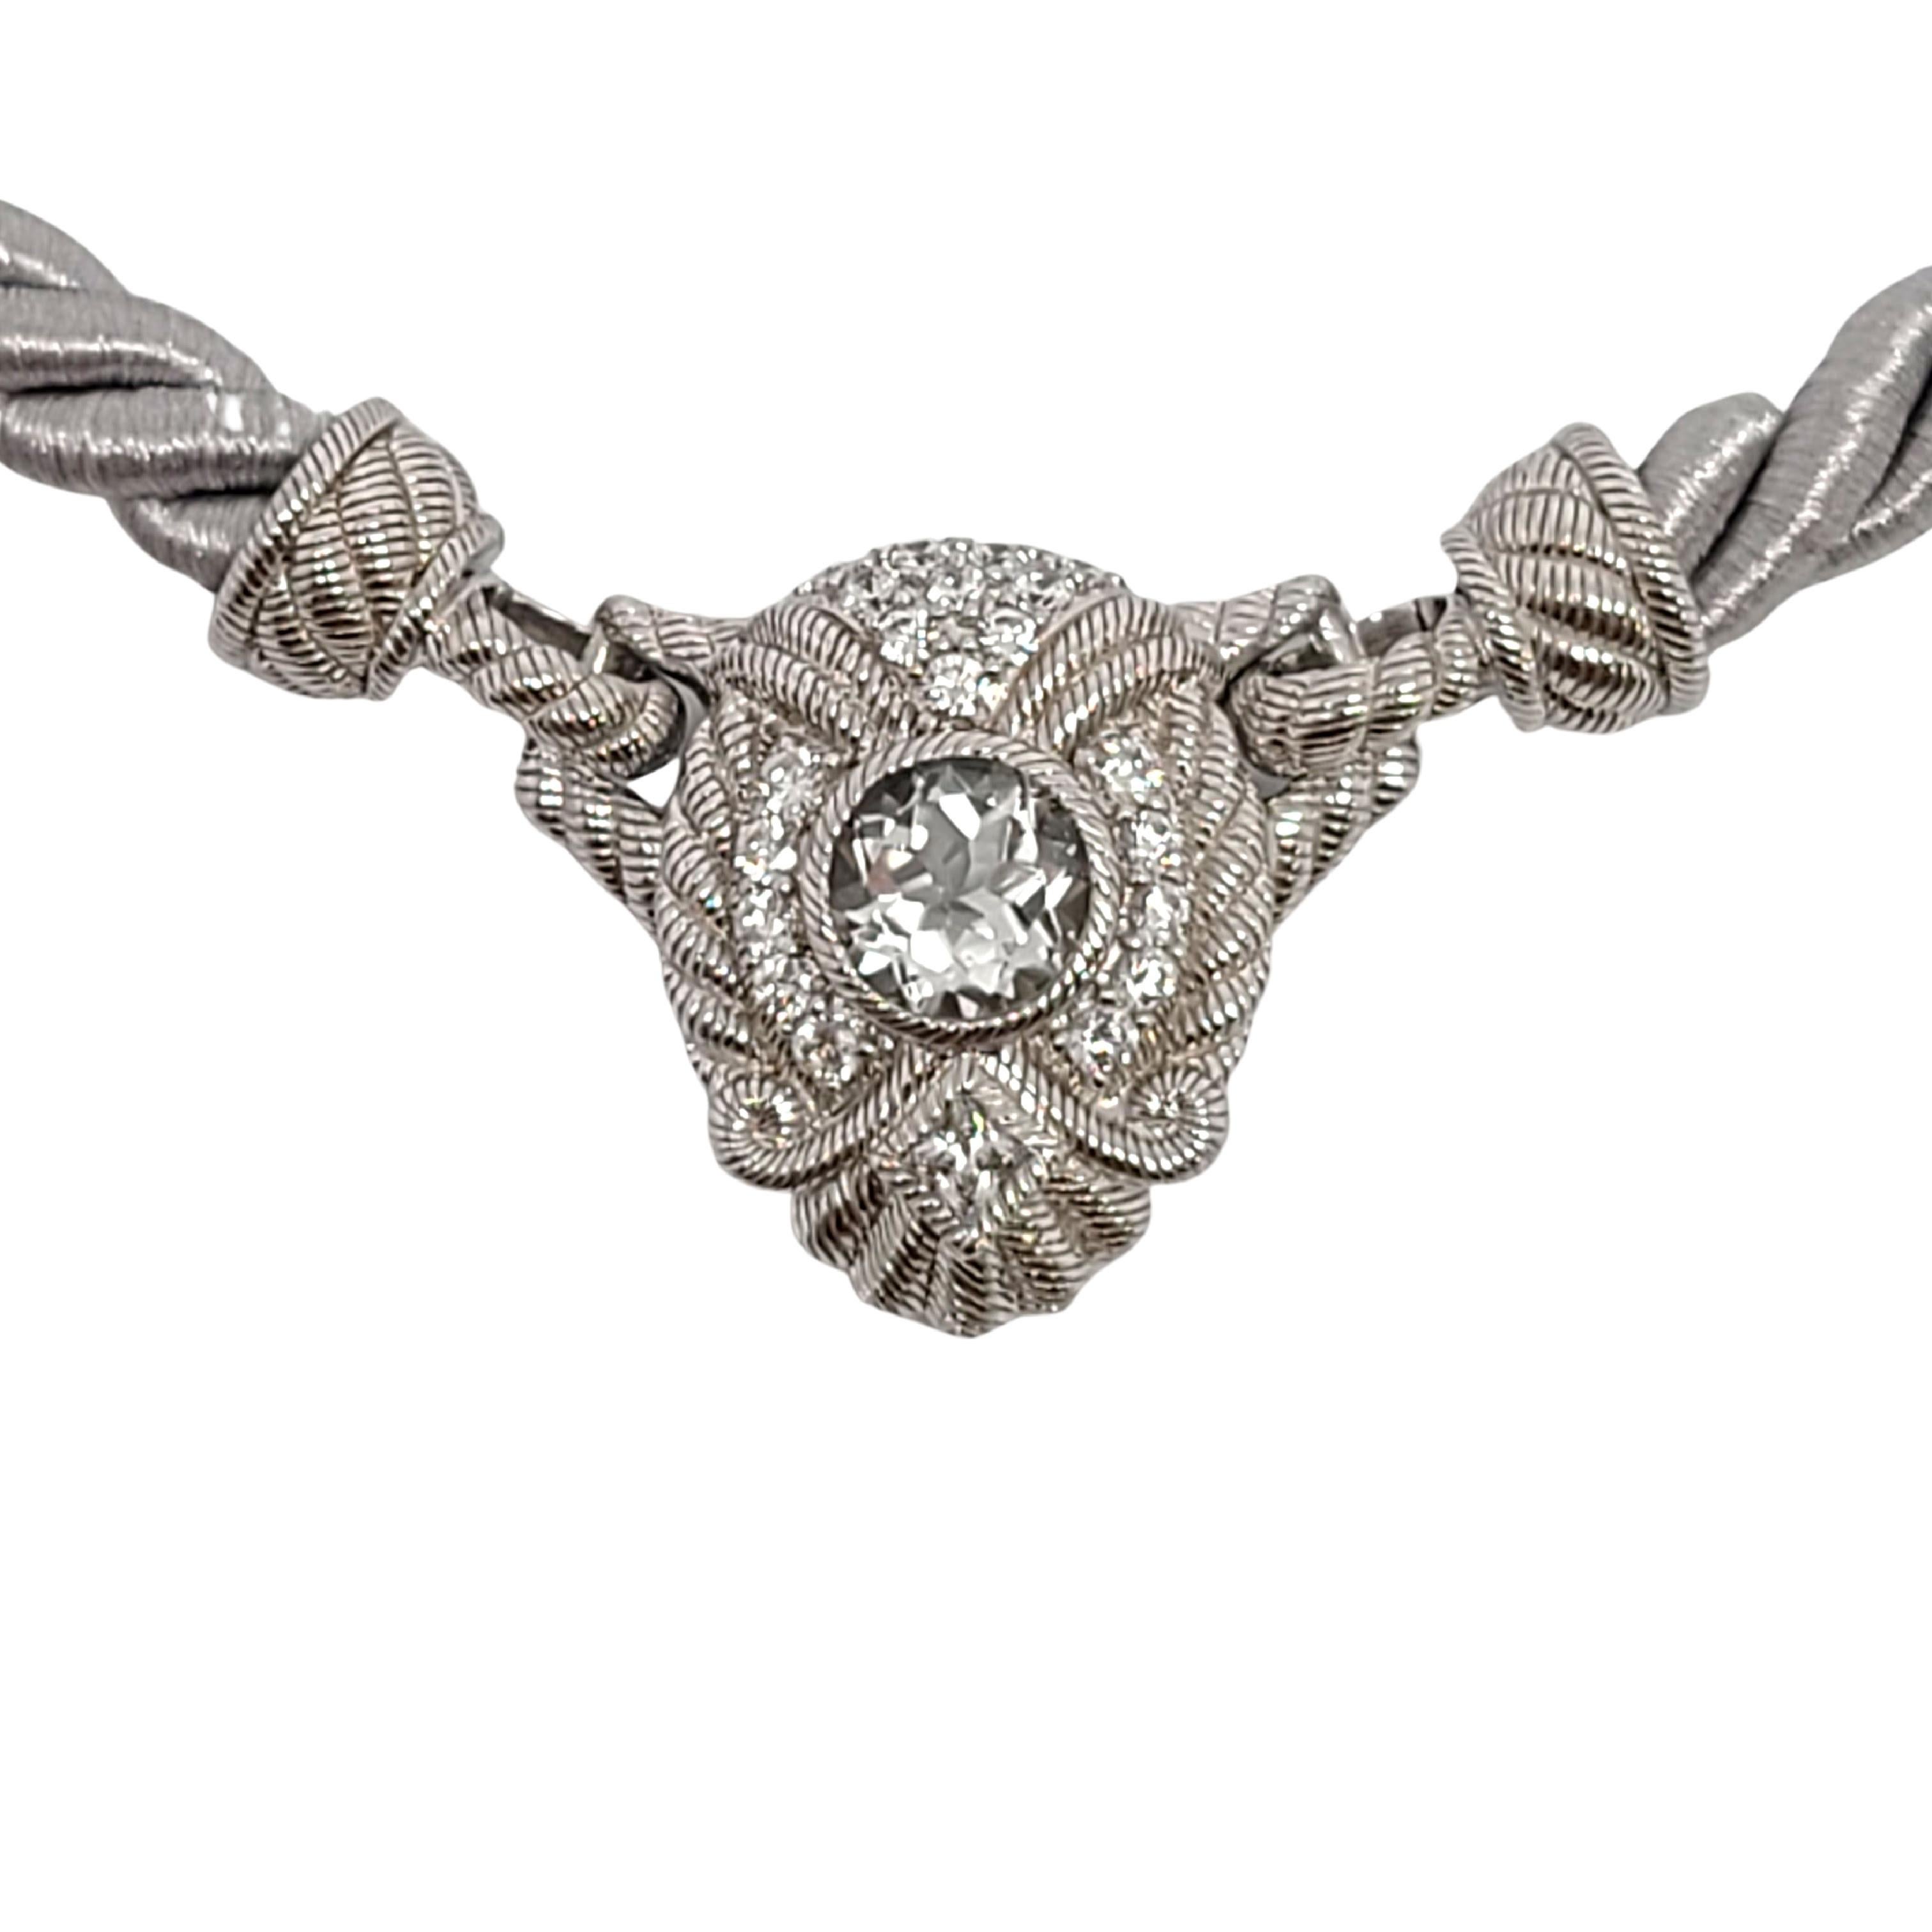 Sterling silver White Topaz and CZ enhancer on a gray silk cord by designer Judith Ripka.

This beautiful piece features sterling silver textured enhancer with a large round faceted white topaz and small round CZs. The gray silver rope design cord